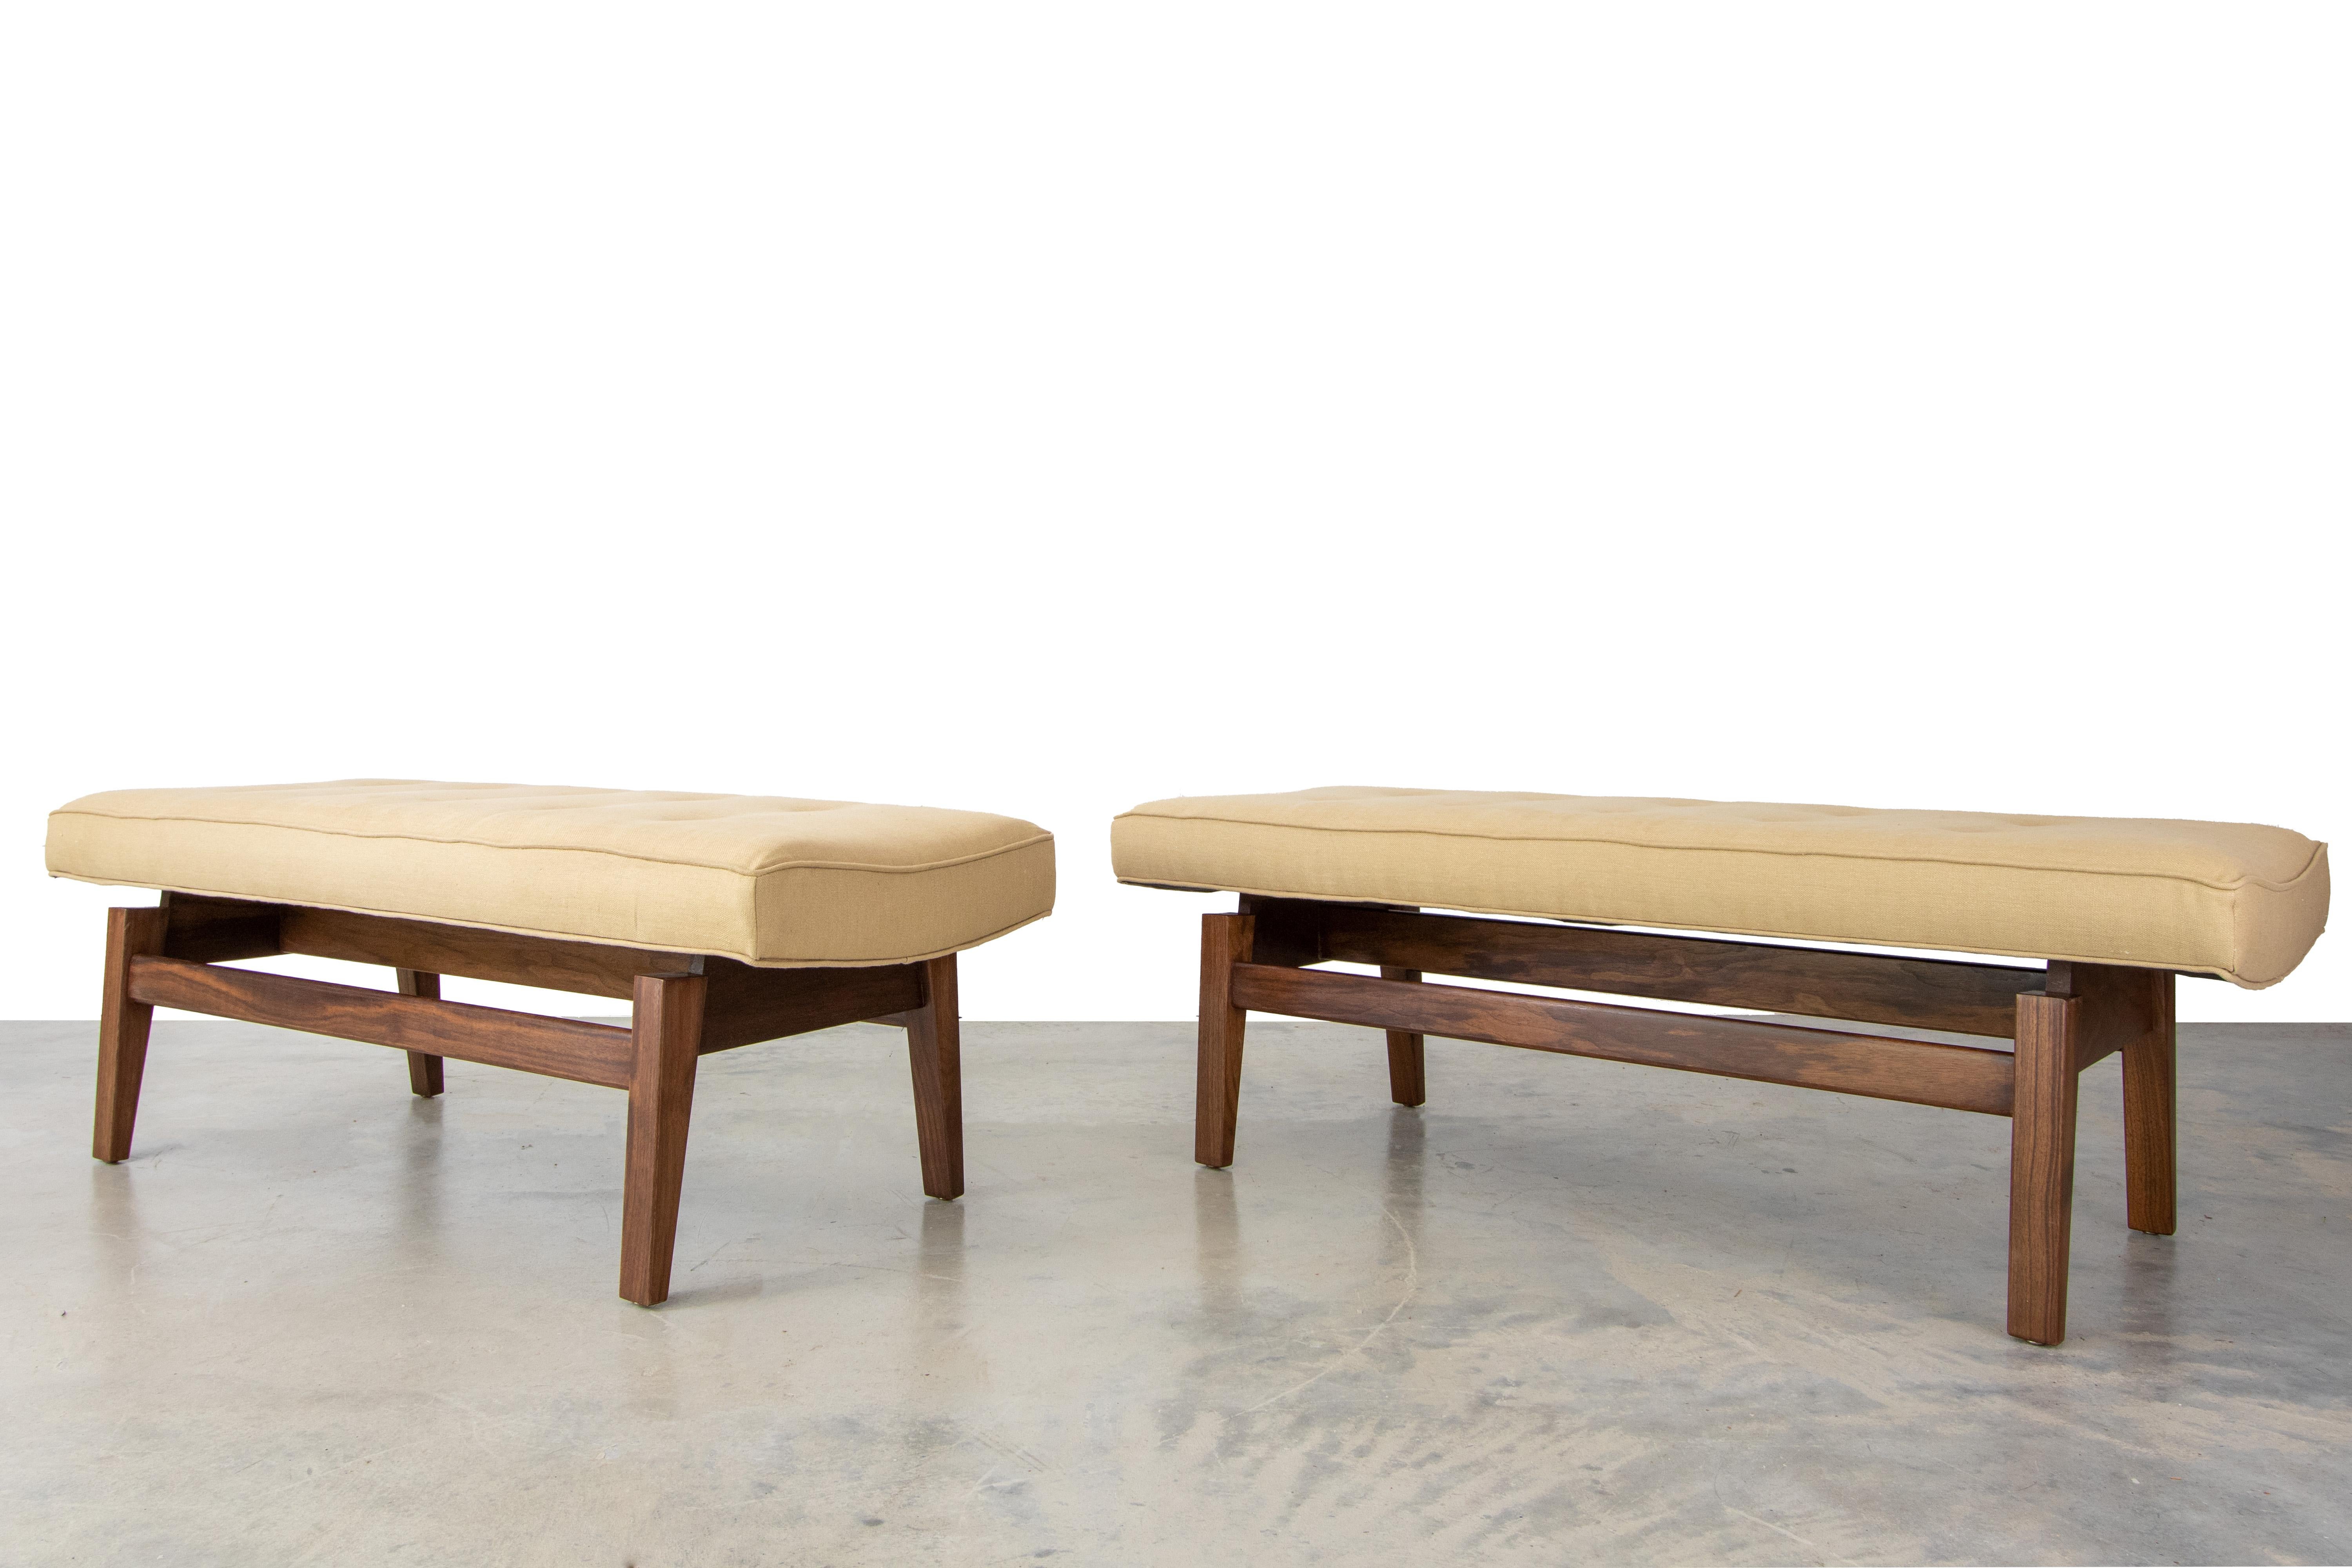 A pair of curved seat Jens Risom Benches in solid walnut and newly upholstered linen fabric. Model no. U-620. Great button tufted seats floating on solid legs, these are one of Jens Risom’s most coveted designs.

Dimensions:

W49” x H17” x